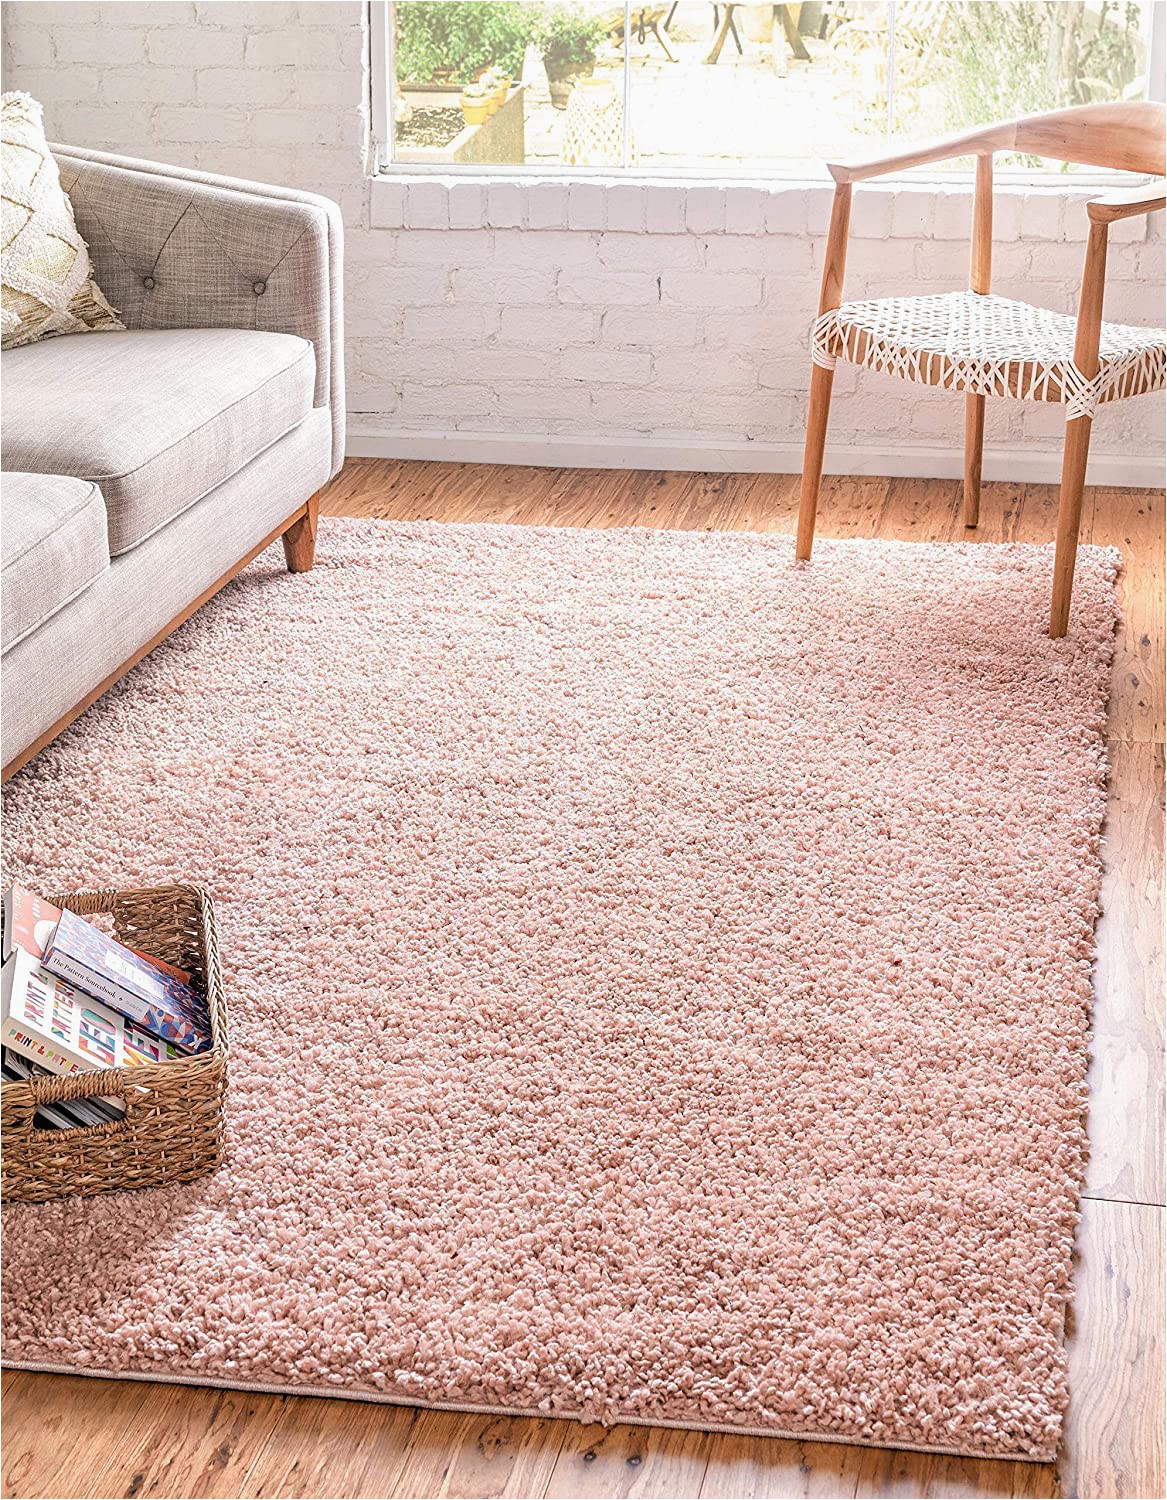 Large Thick soft area Rugs Bravich Rugmasters Very Large Rose Pink Shaggy Rug 5 Cm Thick Shag Pile soft Shaggy area Rugs Modern Carpet Living Room Bedroom Mats 160×230 Cm 5ft3